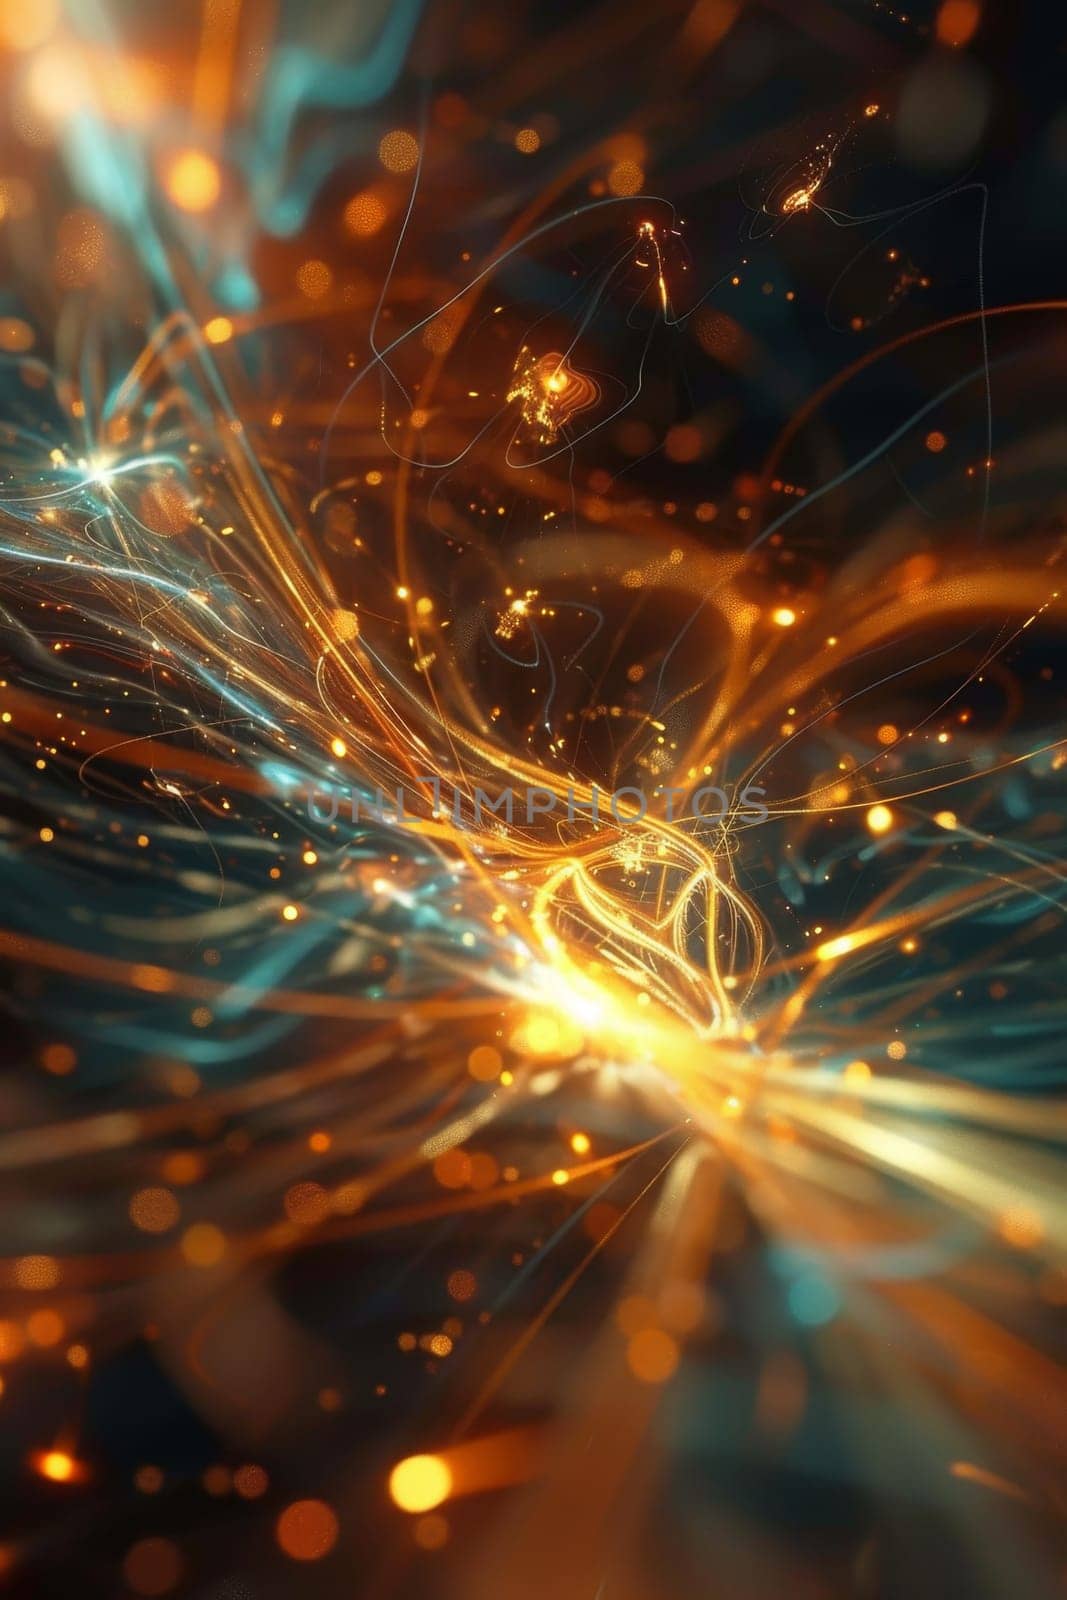 Neural cells with luminous communication nodes in an abstract dark space, 3D illustration by Lobachad